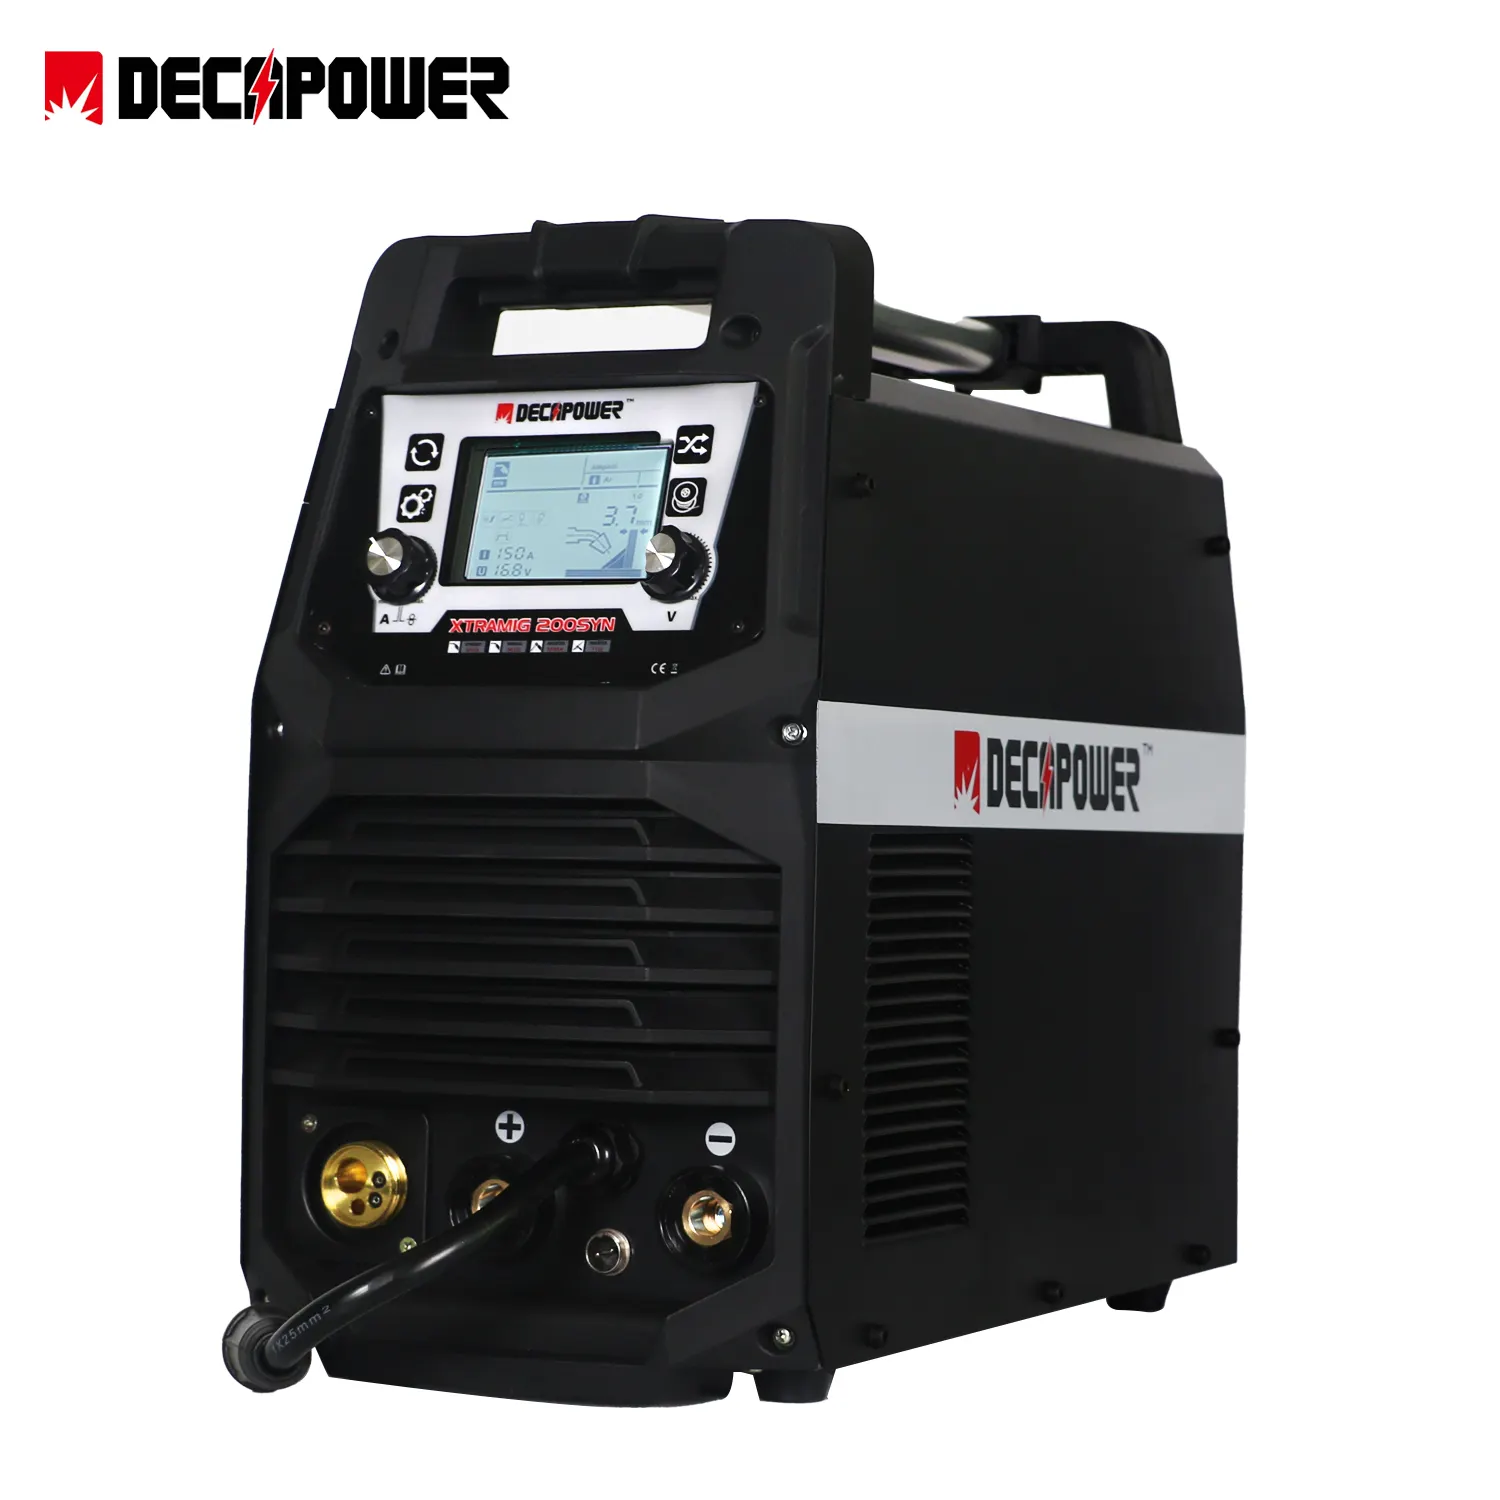 Decapower ALL-IN-ONE IGBT Inverter 200A MMA TIG MAG FLUX Welding MIG welder with LCD